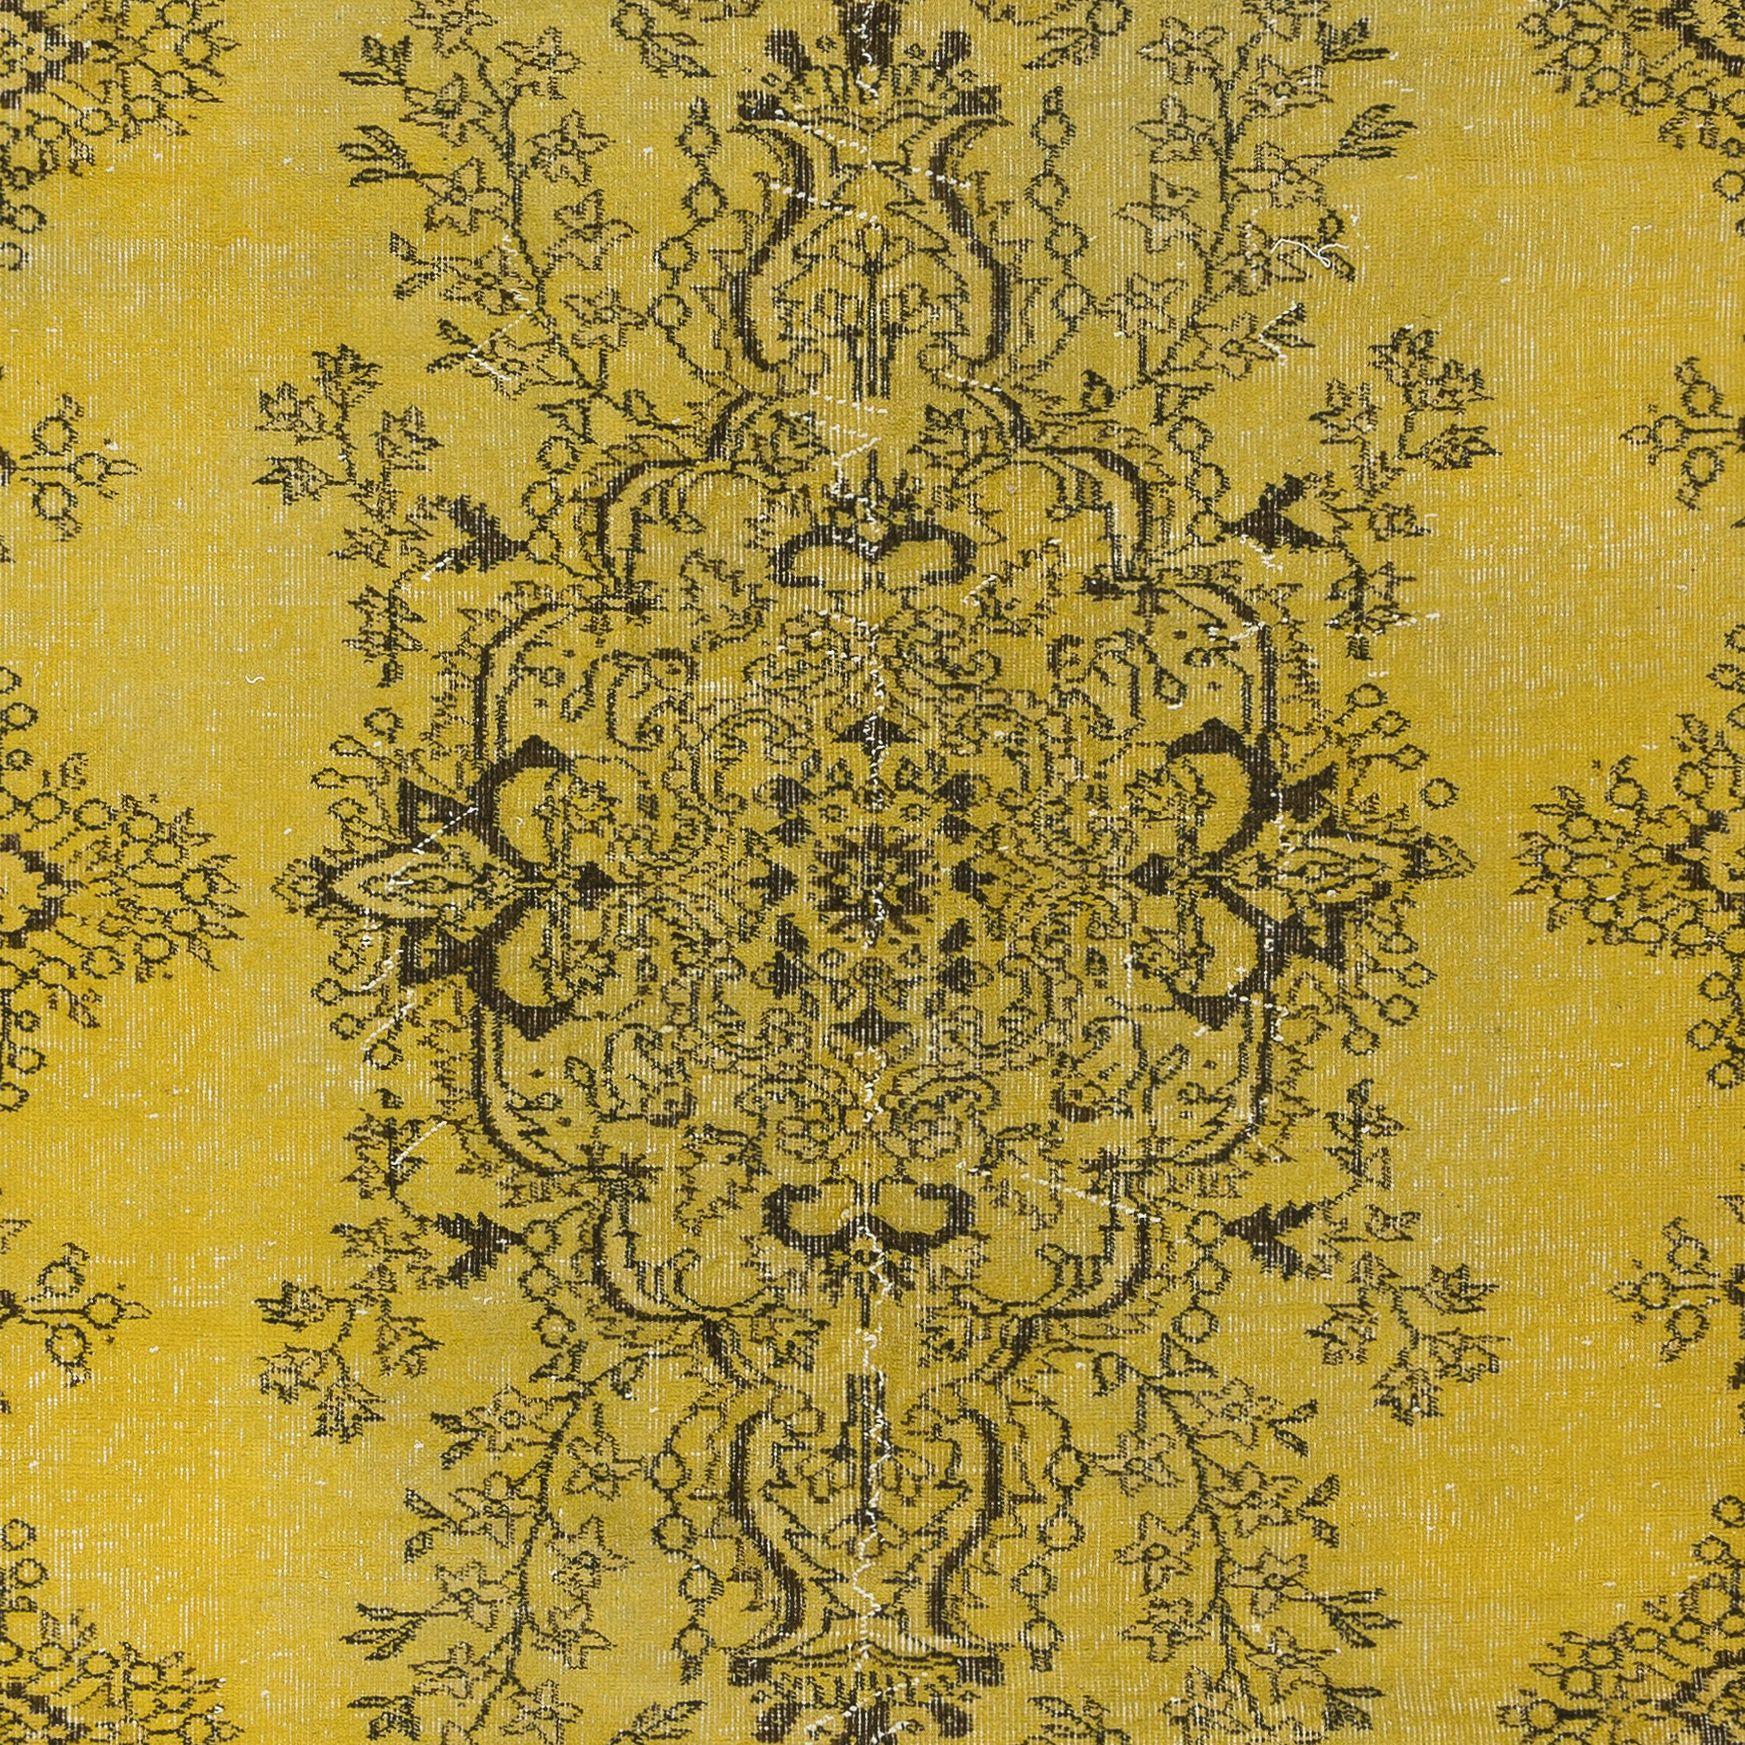 Hand-Woven 6x9.5 Ft Yellow Handmade Area Rug for Modern Interiors, Vintage Turkish Carpet For Sale